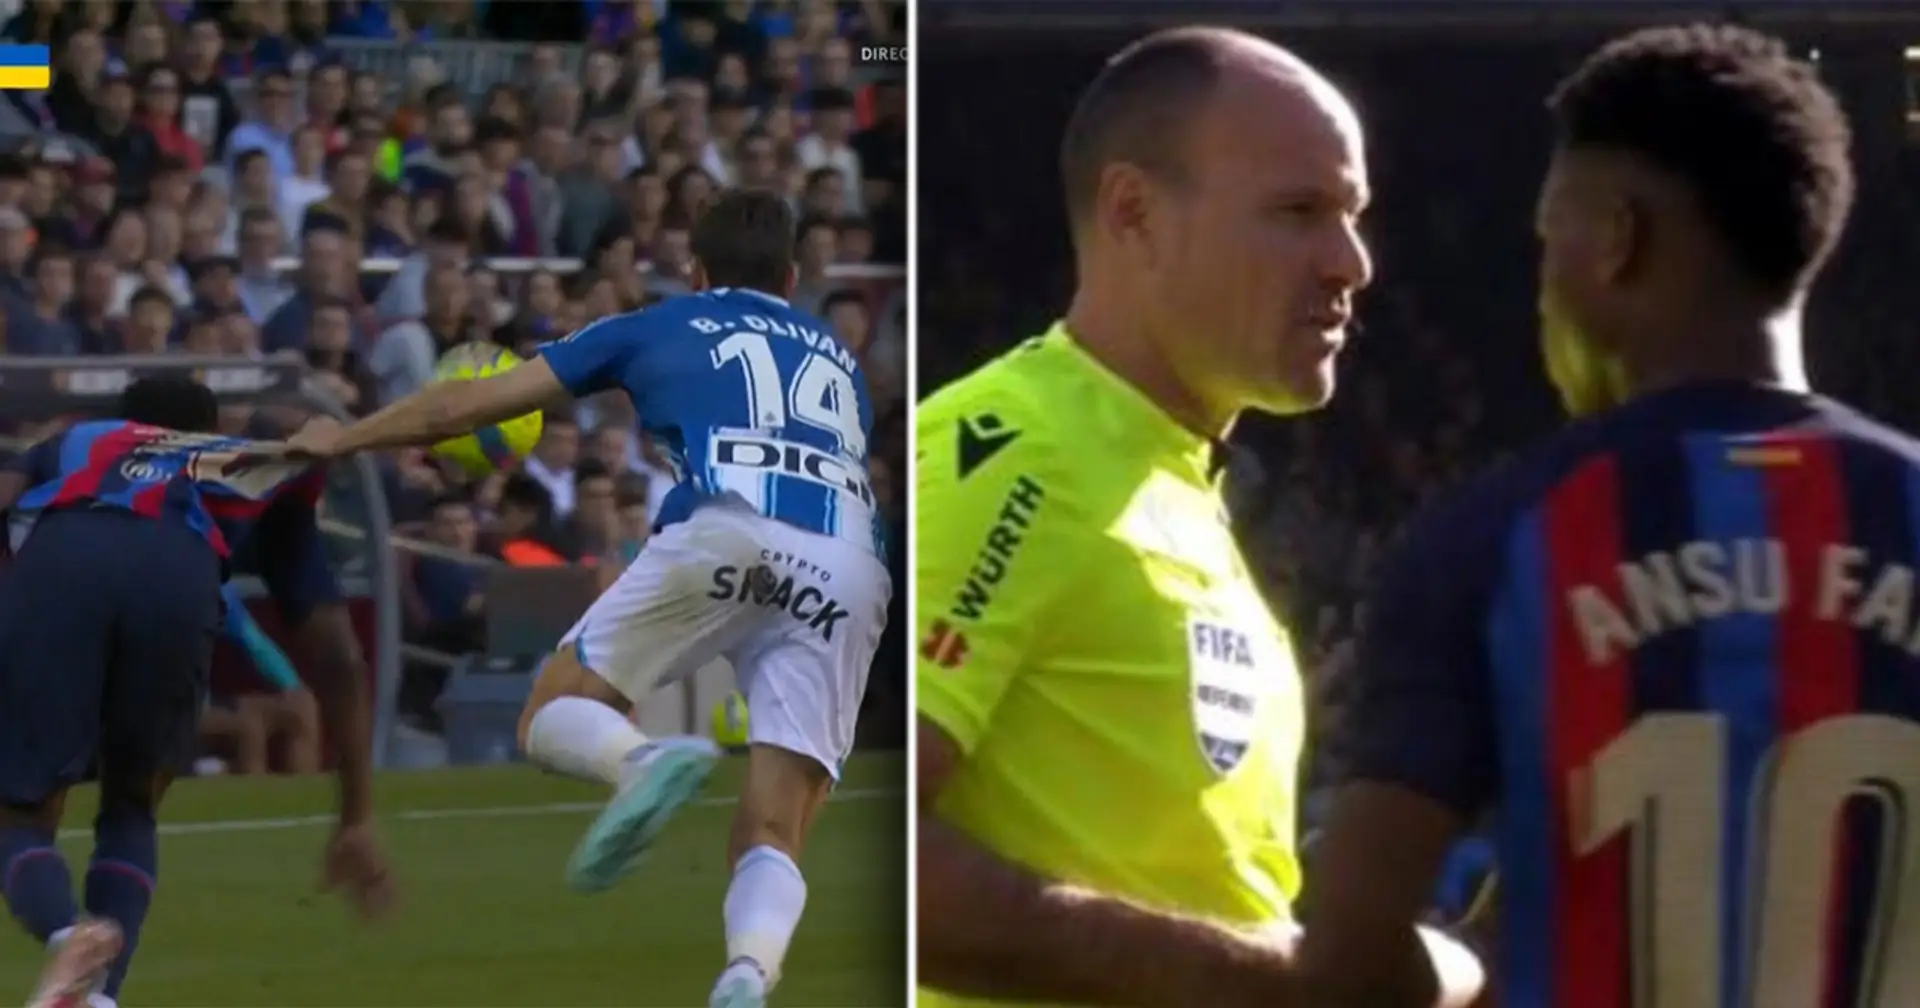 'S**t up and come up to me': What Mateu Lahoz told Ansu Fati during Espanyol clash